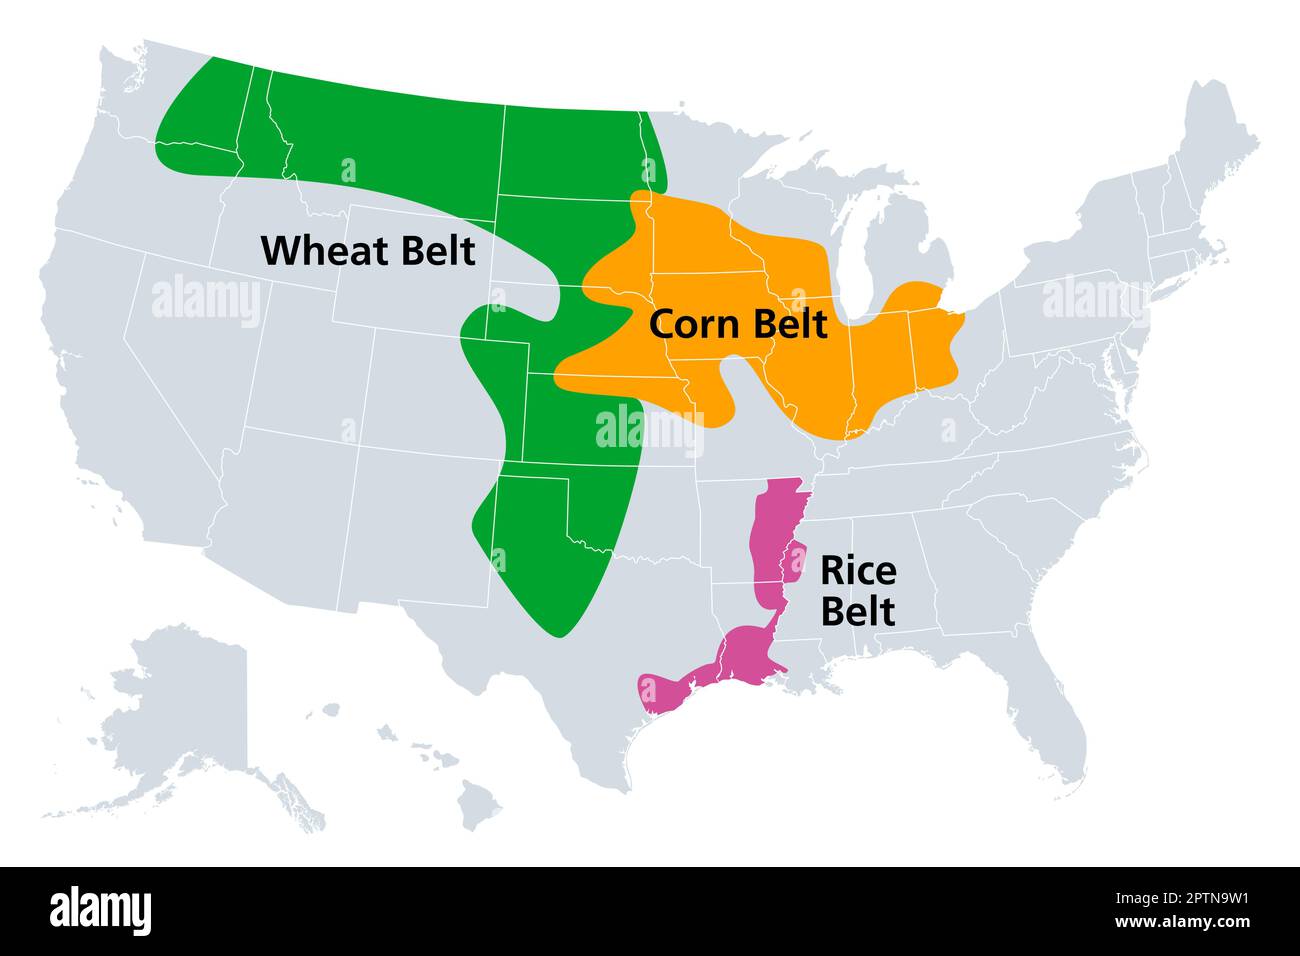 Corn Belt, Wheat Belt and Rice Belt of the United States, political map ...